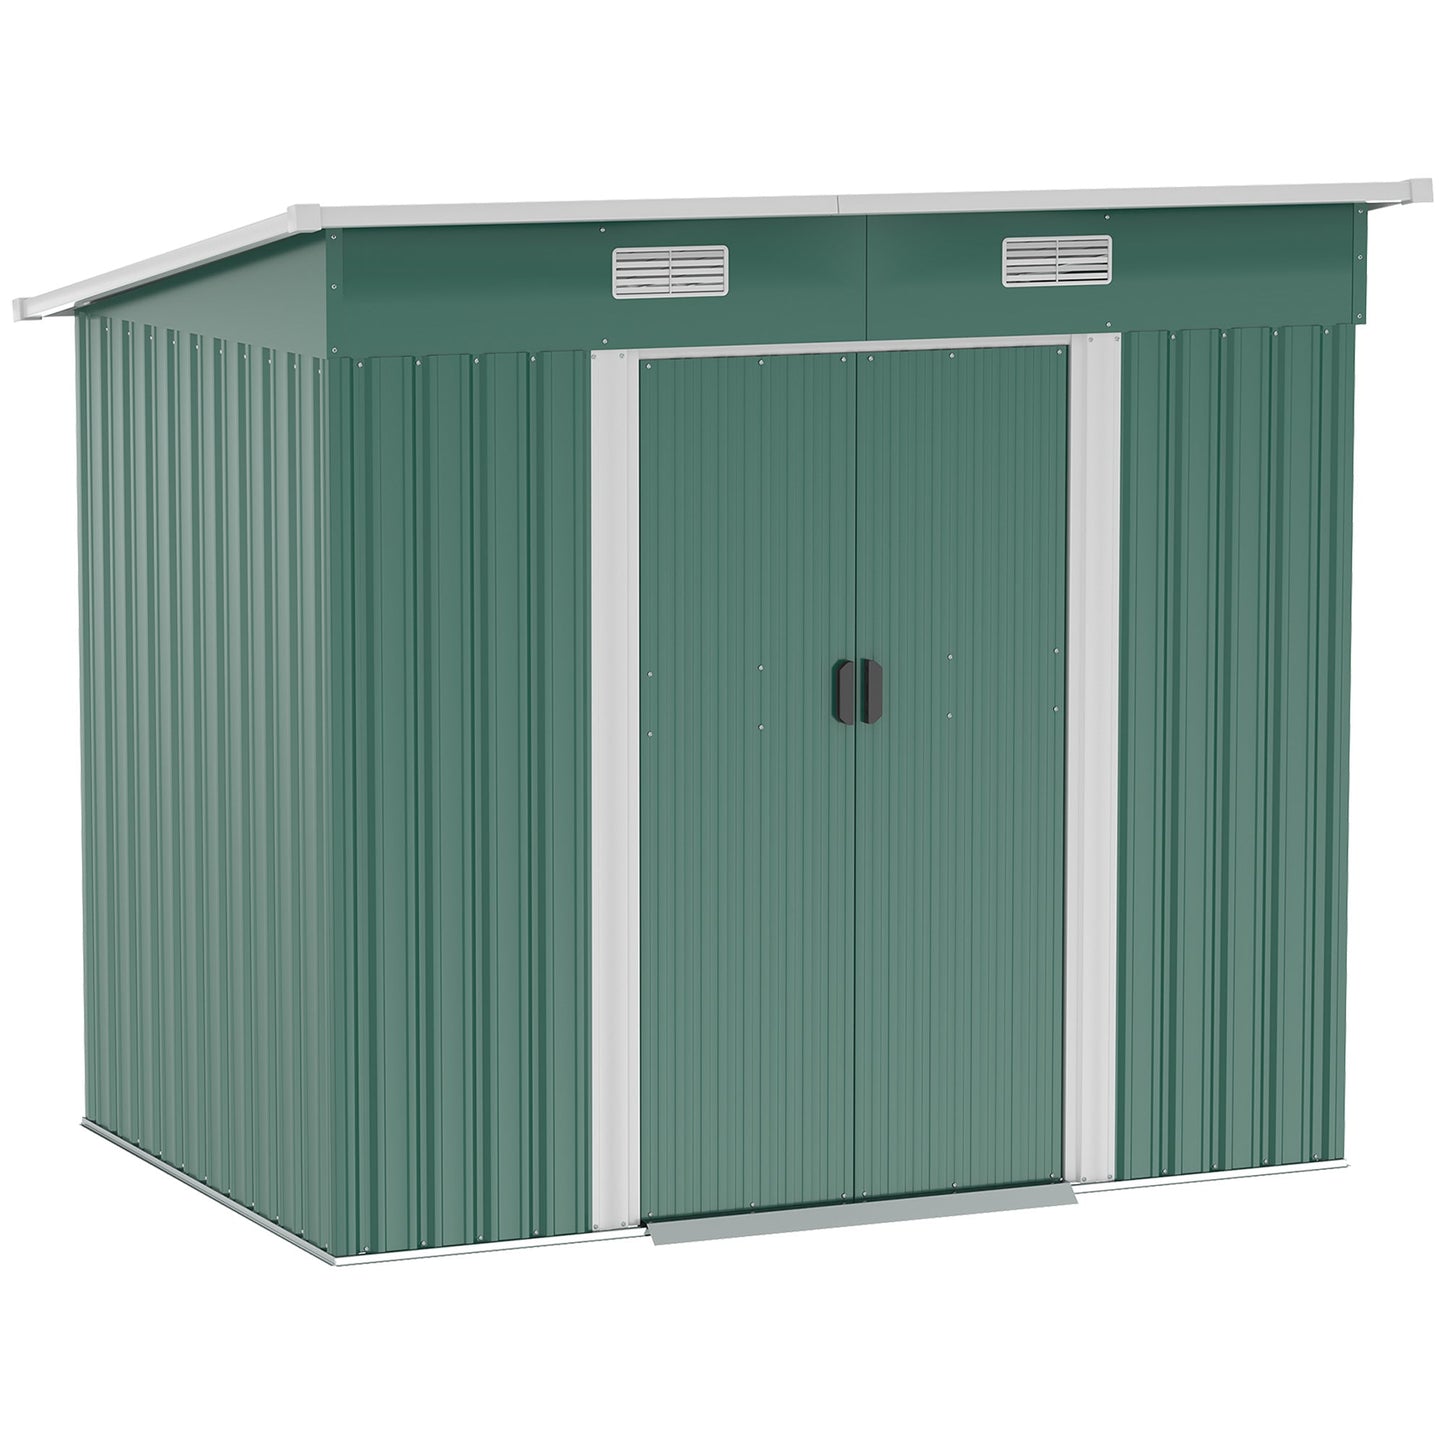 Outdoor and Garden-7' x 4' Metal Outdoor Storage Shed Garden Lockable Shed Tool Utility Storage Unit, Dark Green - Outdoor Style Company